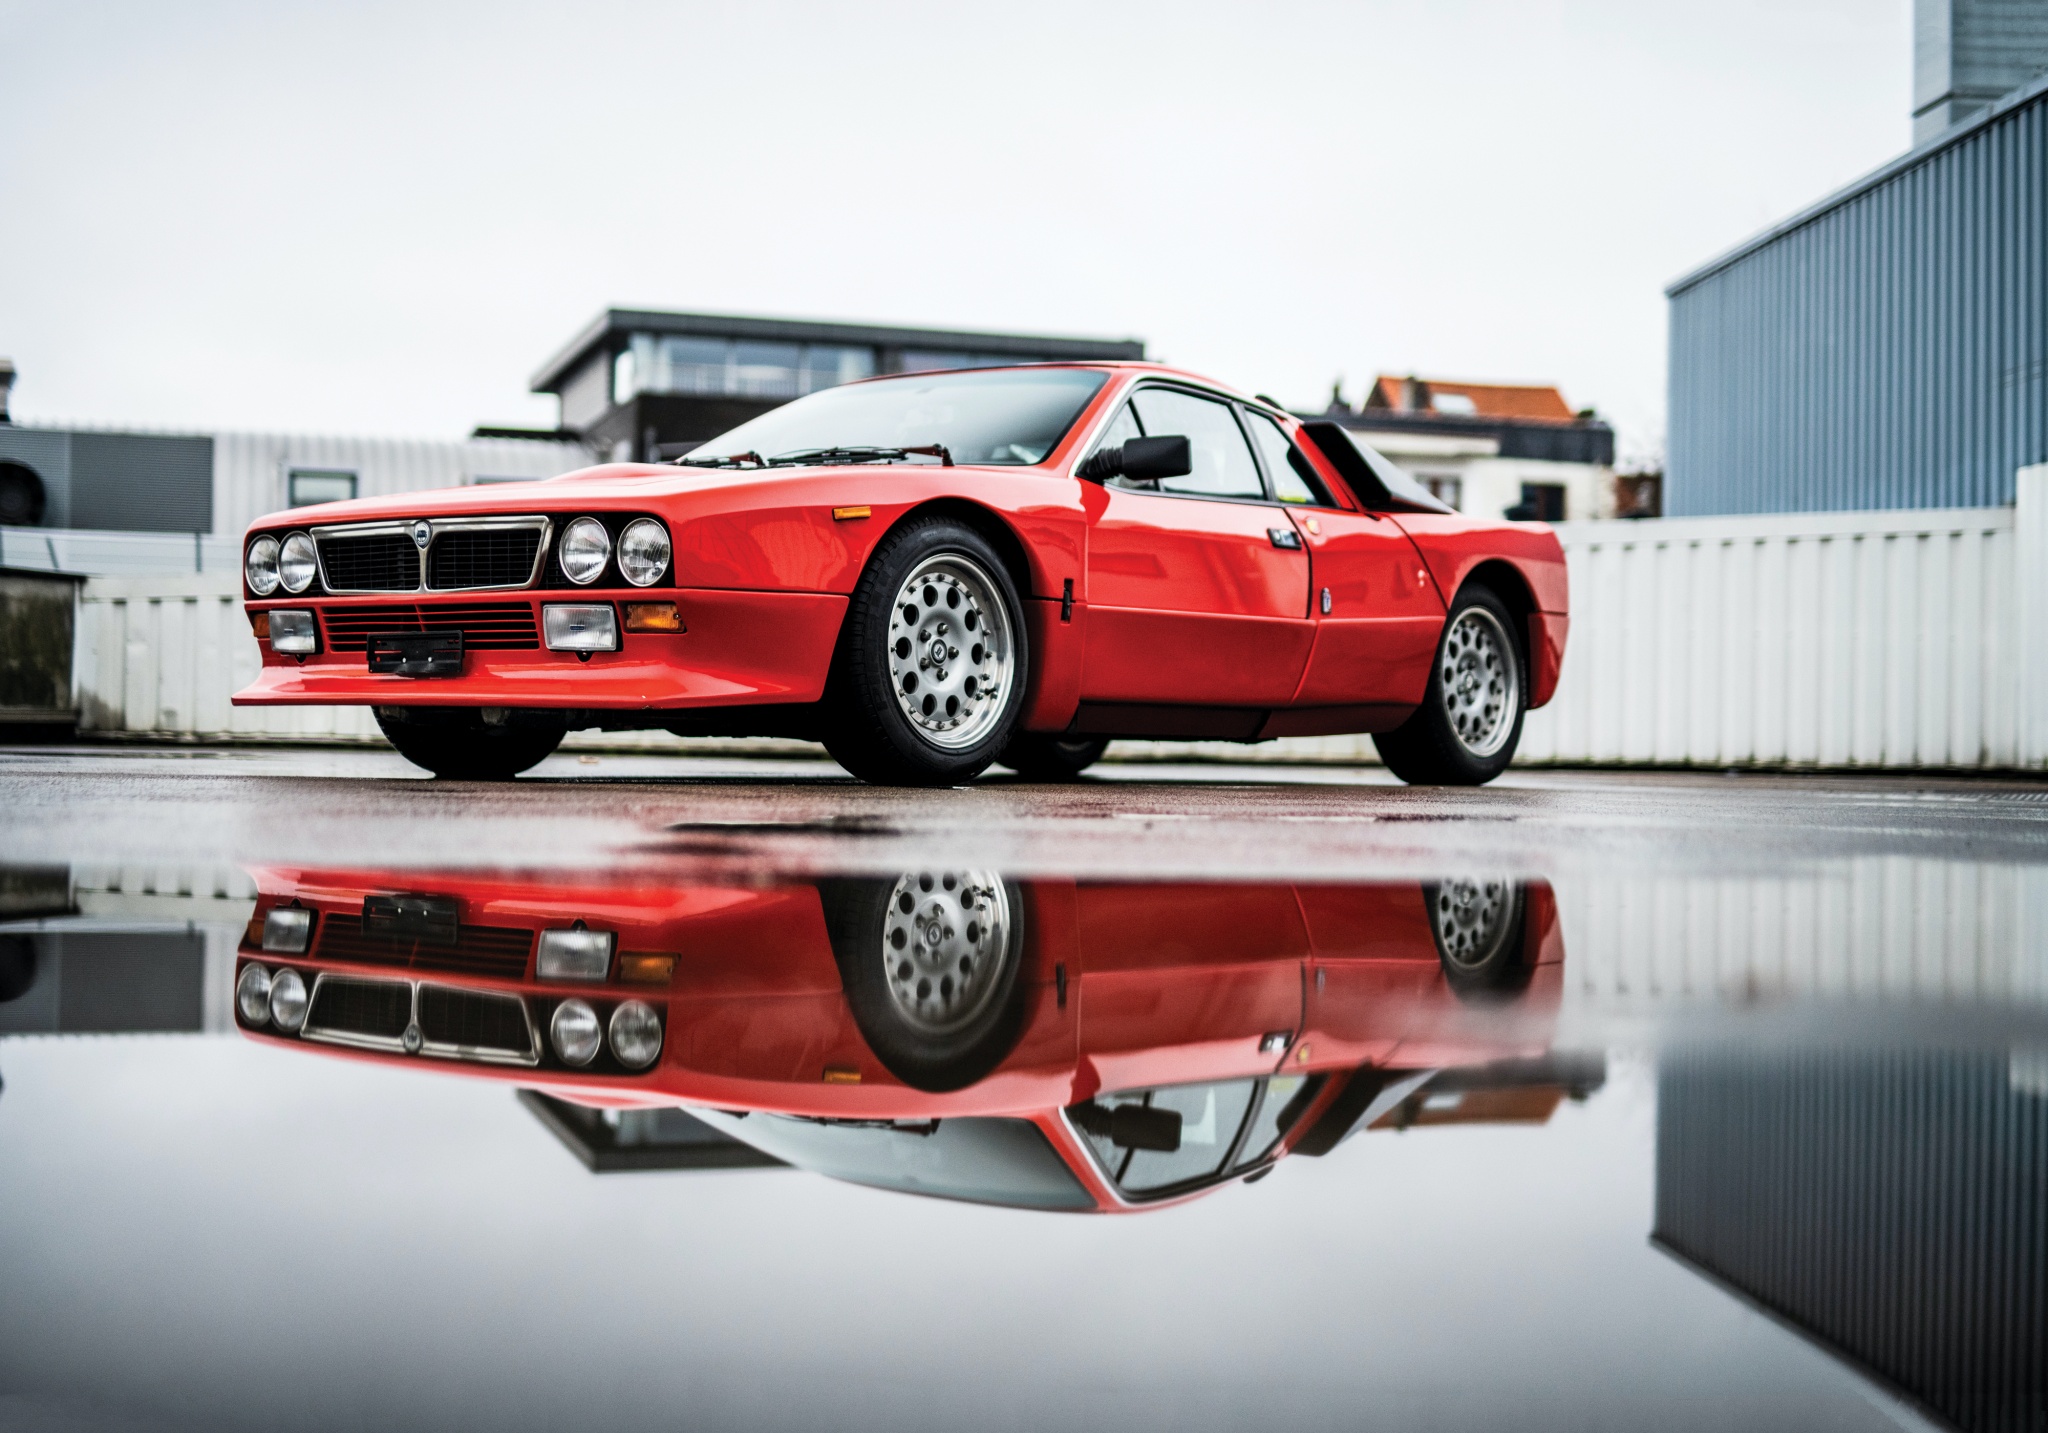 Lancia 037 Stradale (1981) | RM Sotheby's